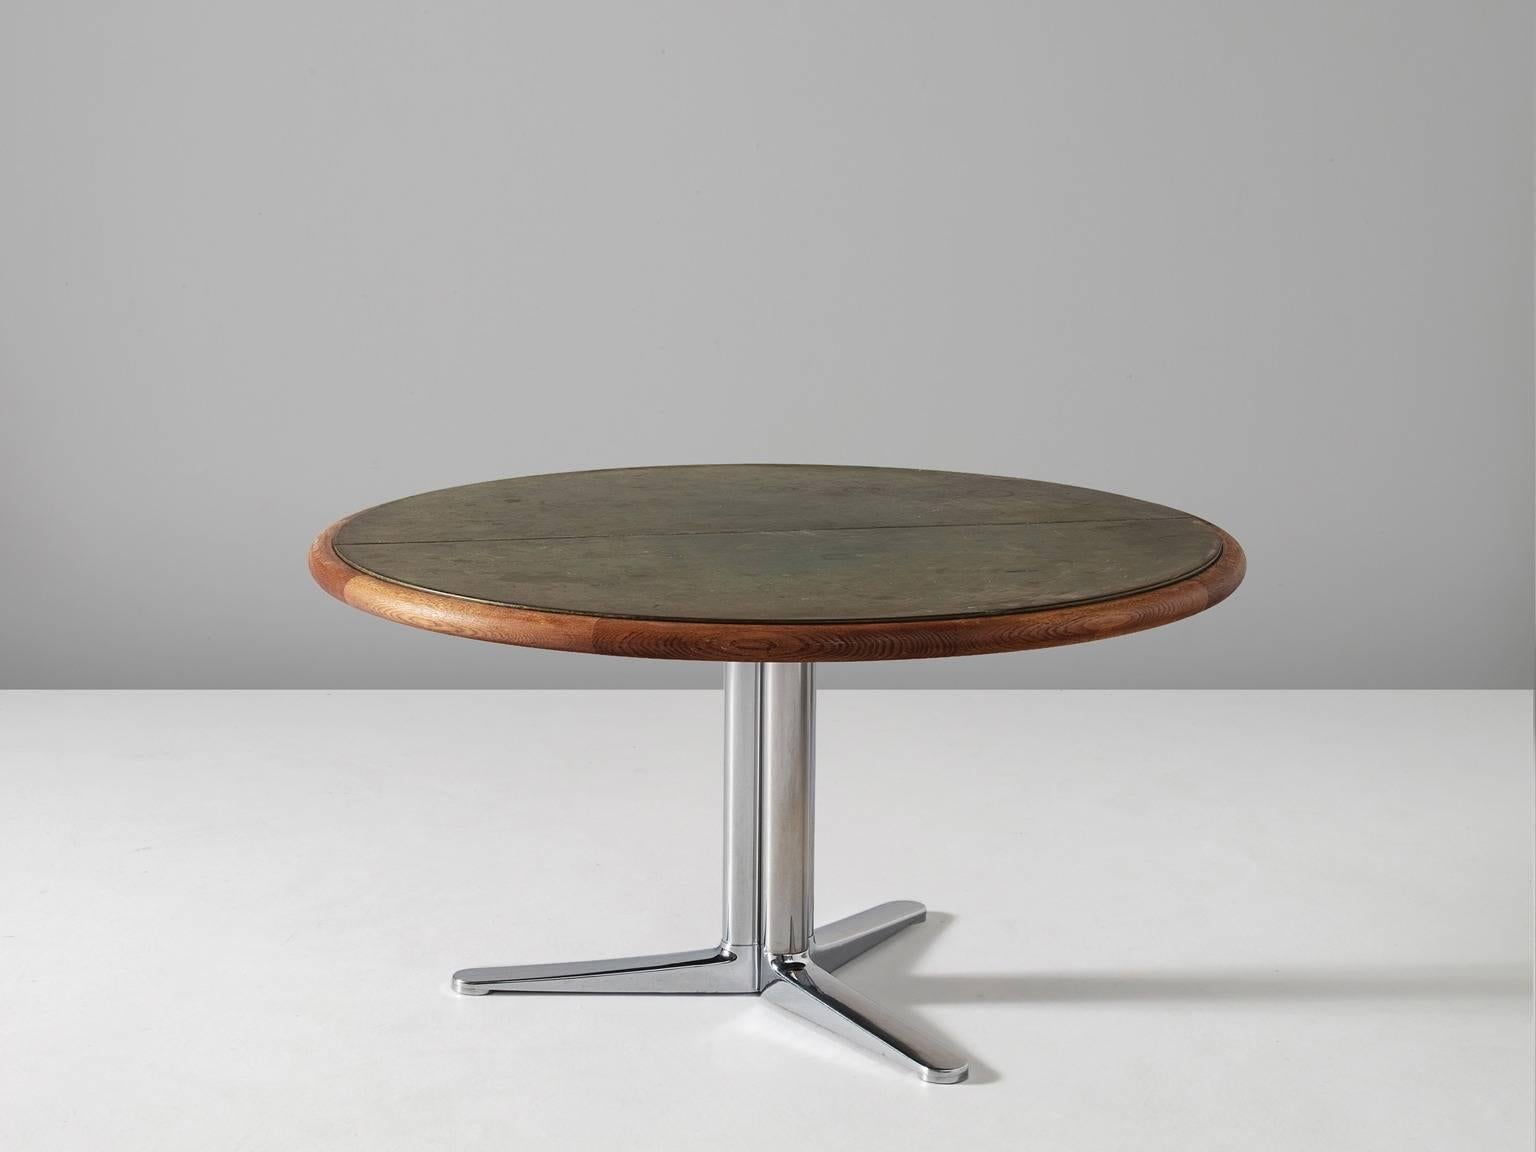 Dining table, in oak, leather and steel, by Warren Platner for Knoll International, United States 1960s.

Round dining table by Warren Platner. This table has a top of green leather. The leather shows a beautiful patina, yet there are some traces of